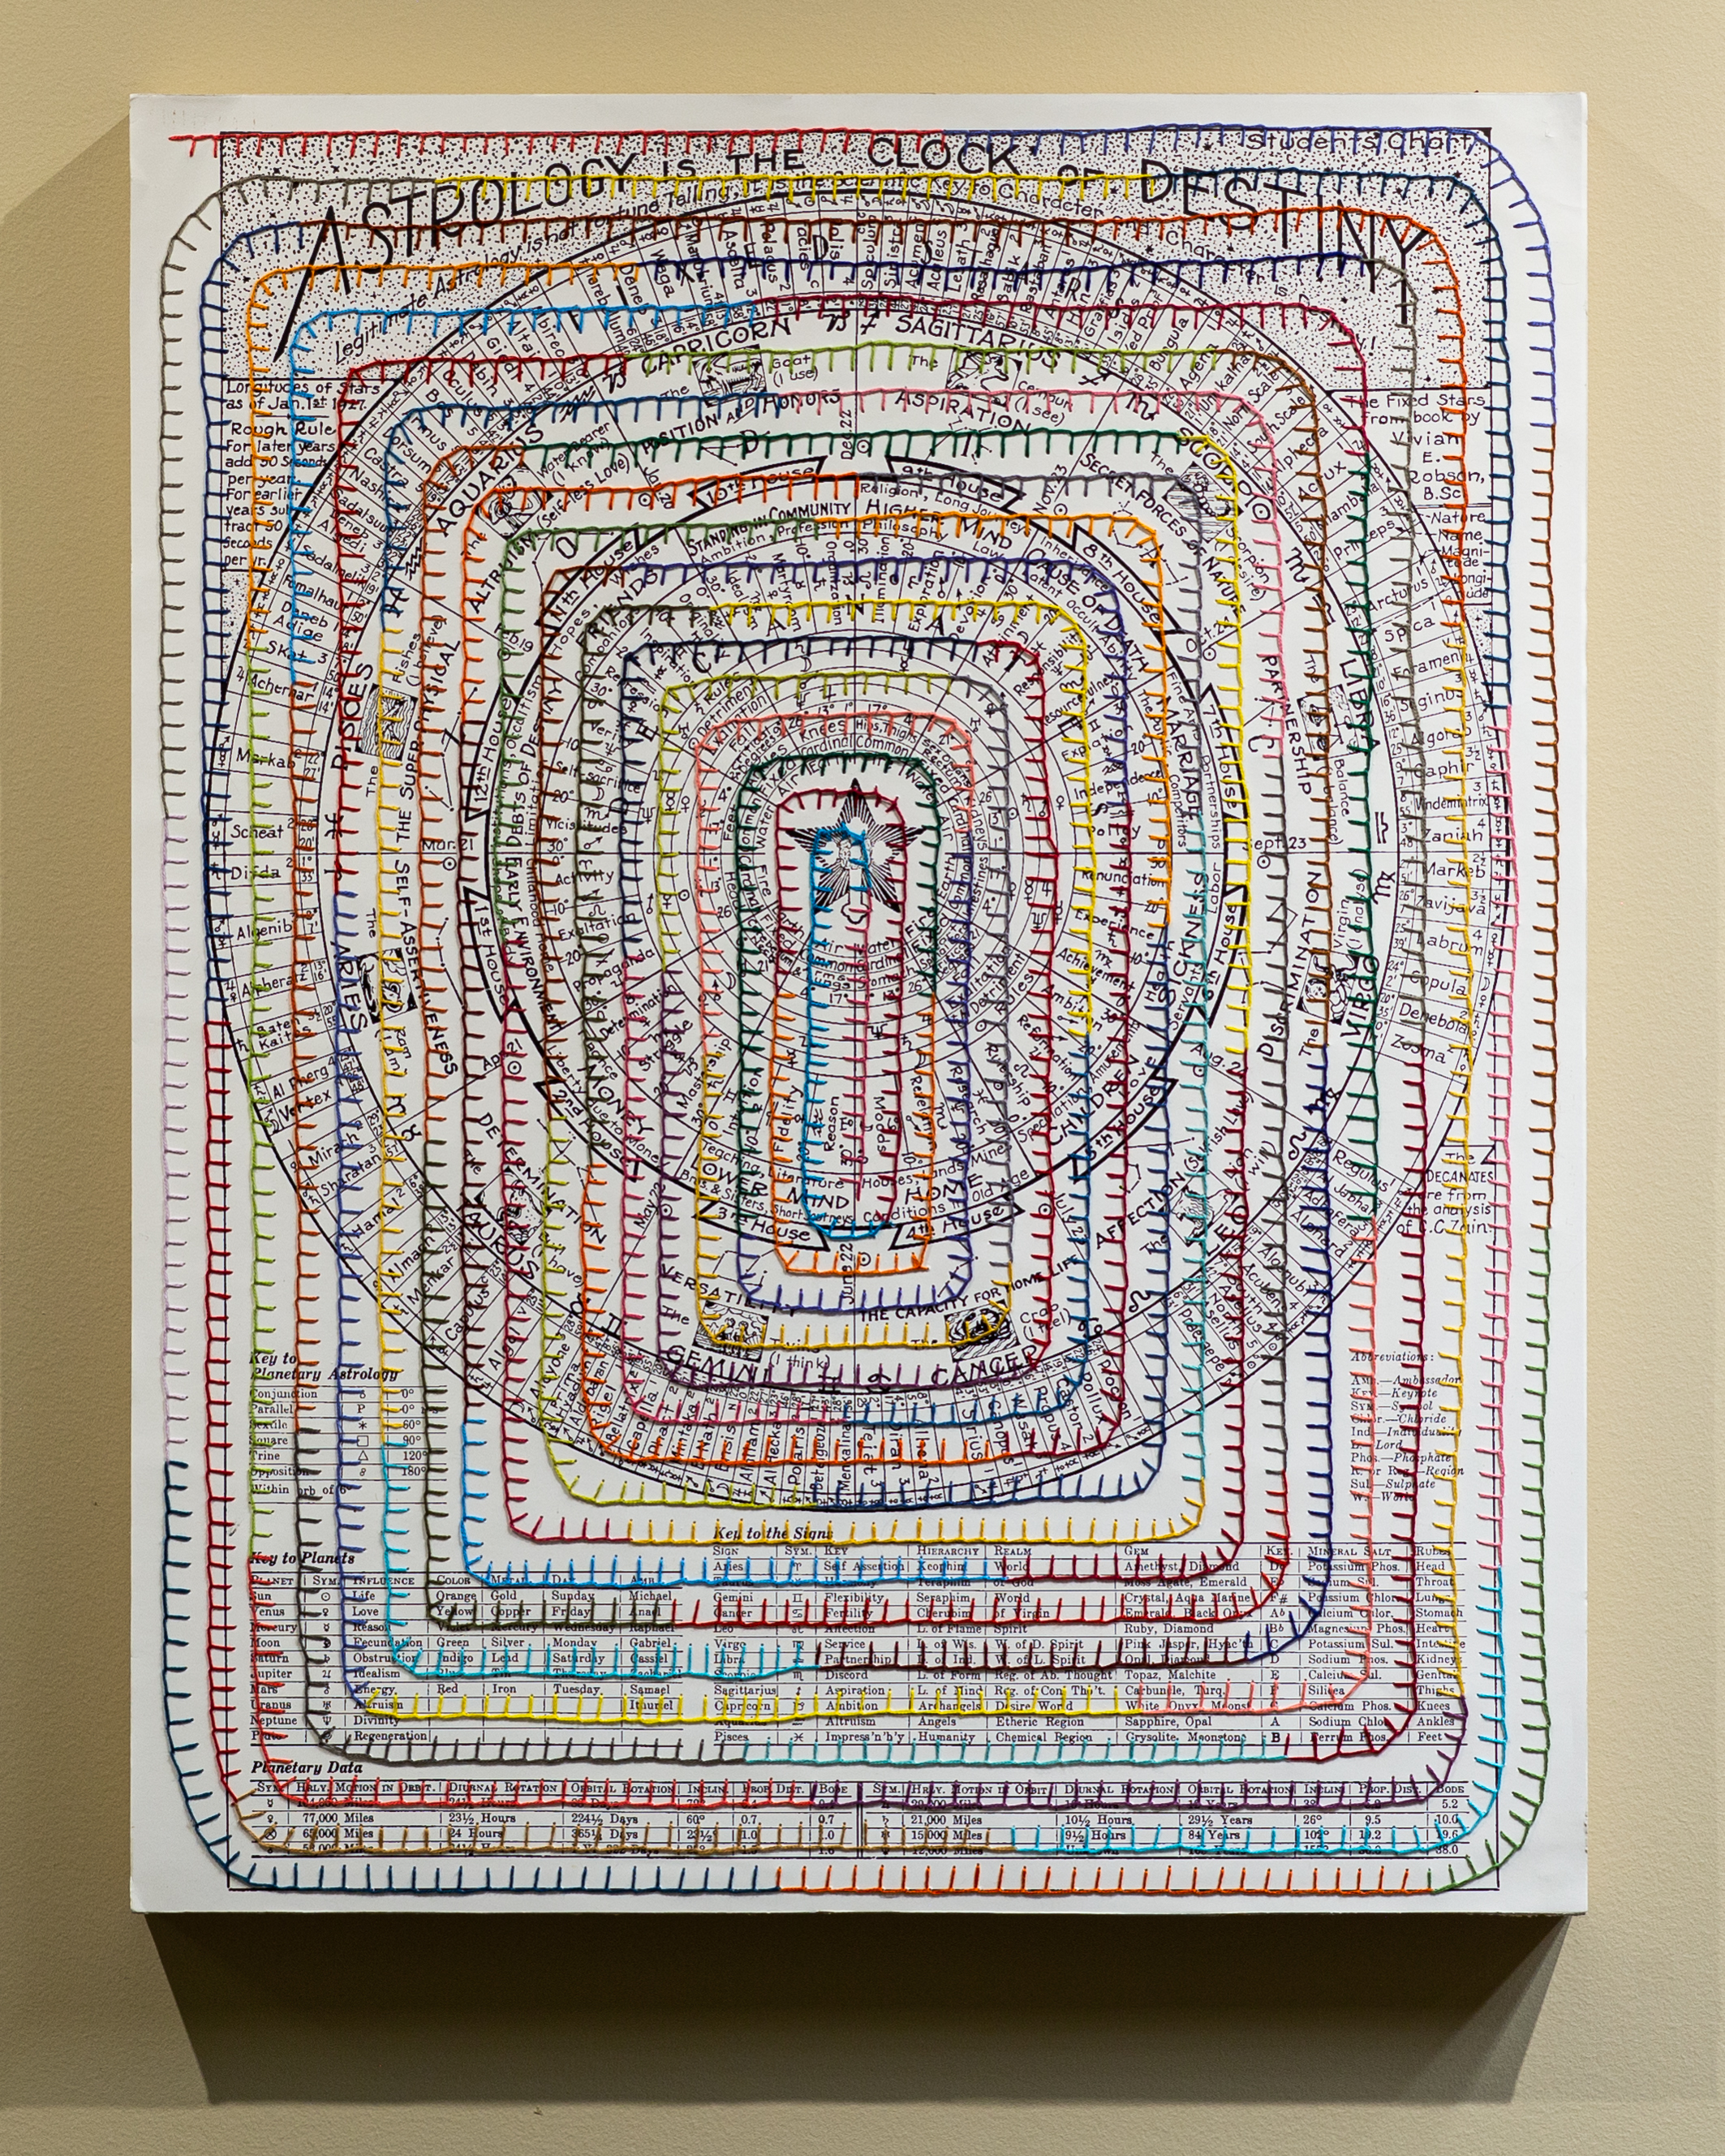 Nick DeFord, Babble (Tick Tock), 20" x 16", embroidery on paper, 2015